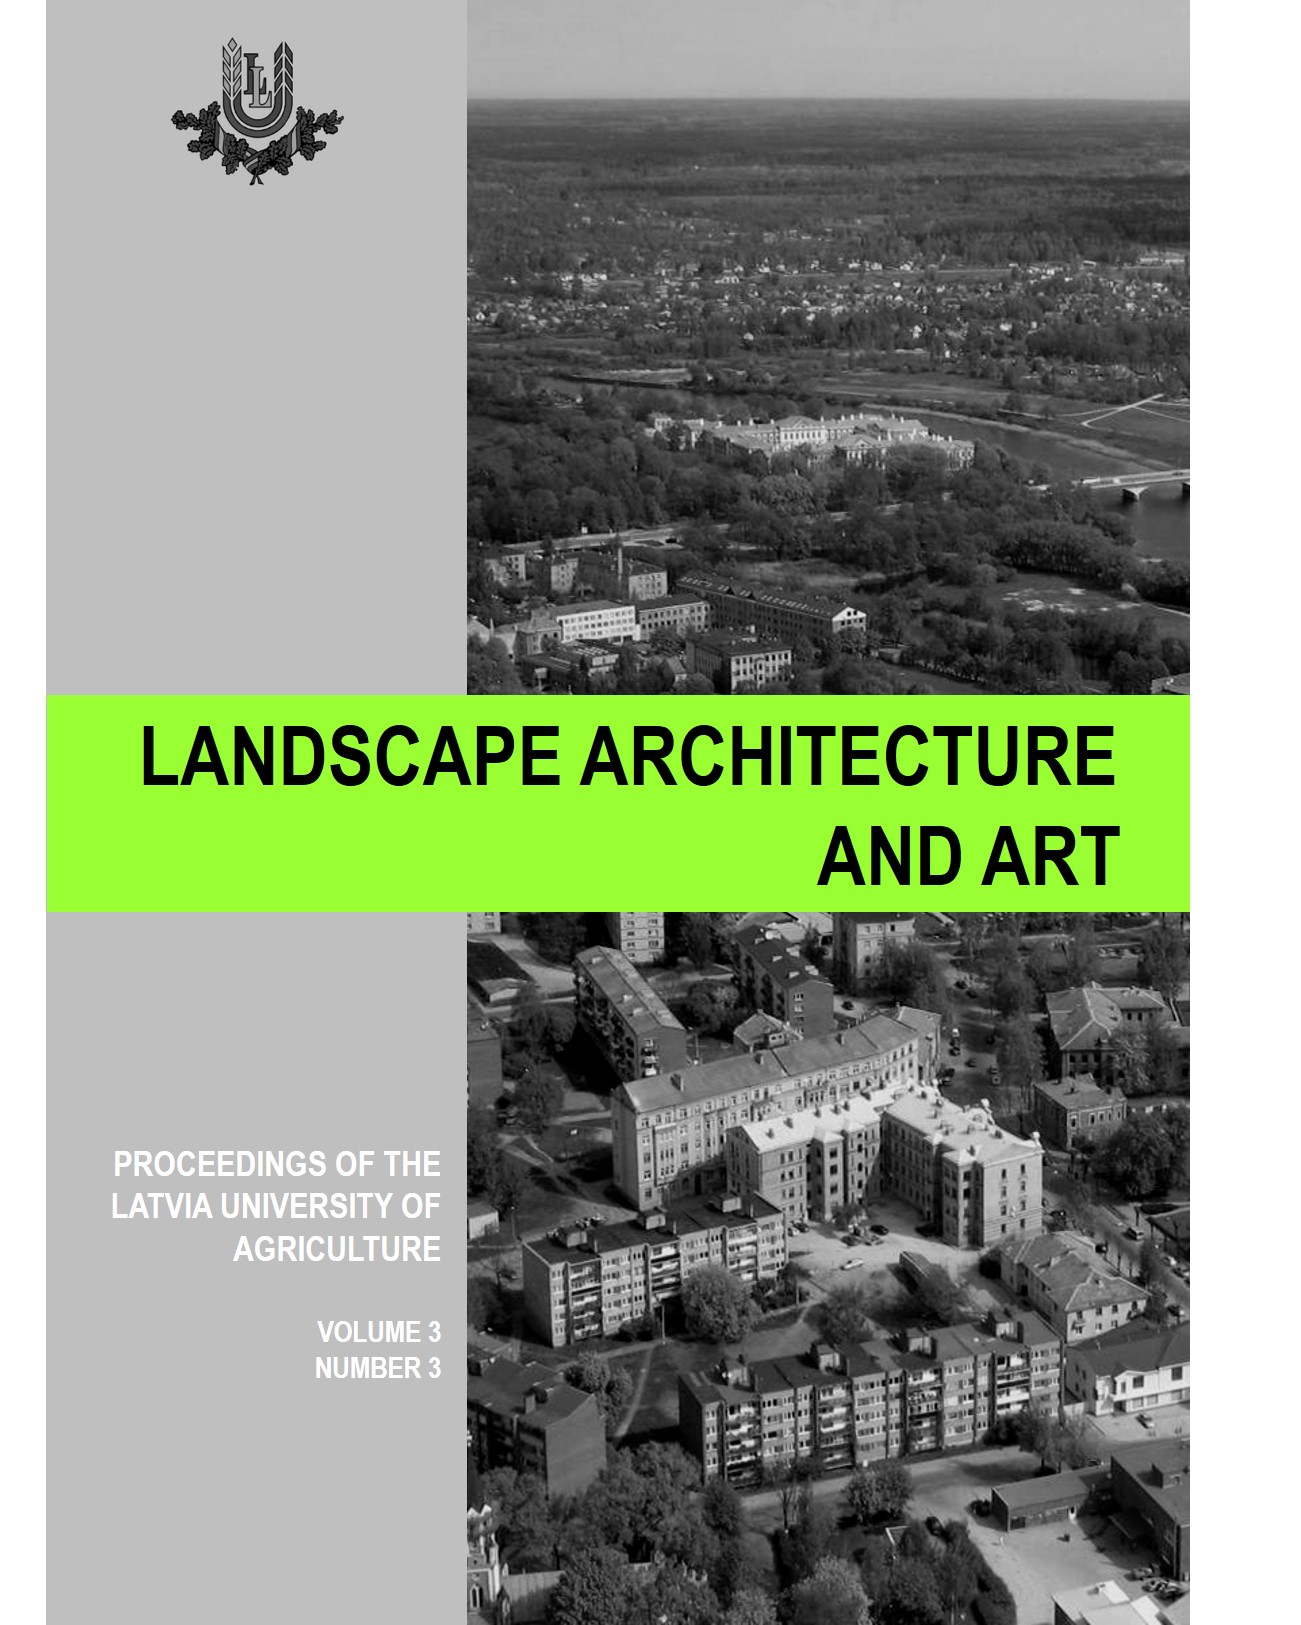 					View Vol. 3 No. 3 (2013): Proceedings of the Latvia University of Agriculture "Landscape Architecture and Art", Volume 3, Number 3
				